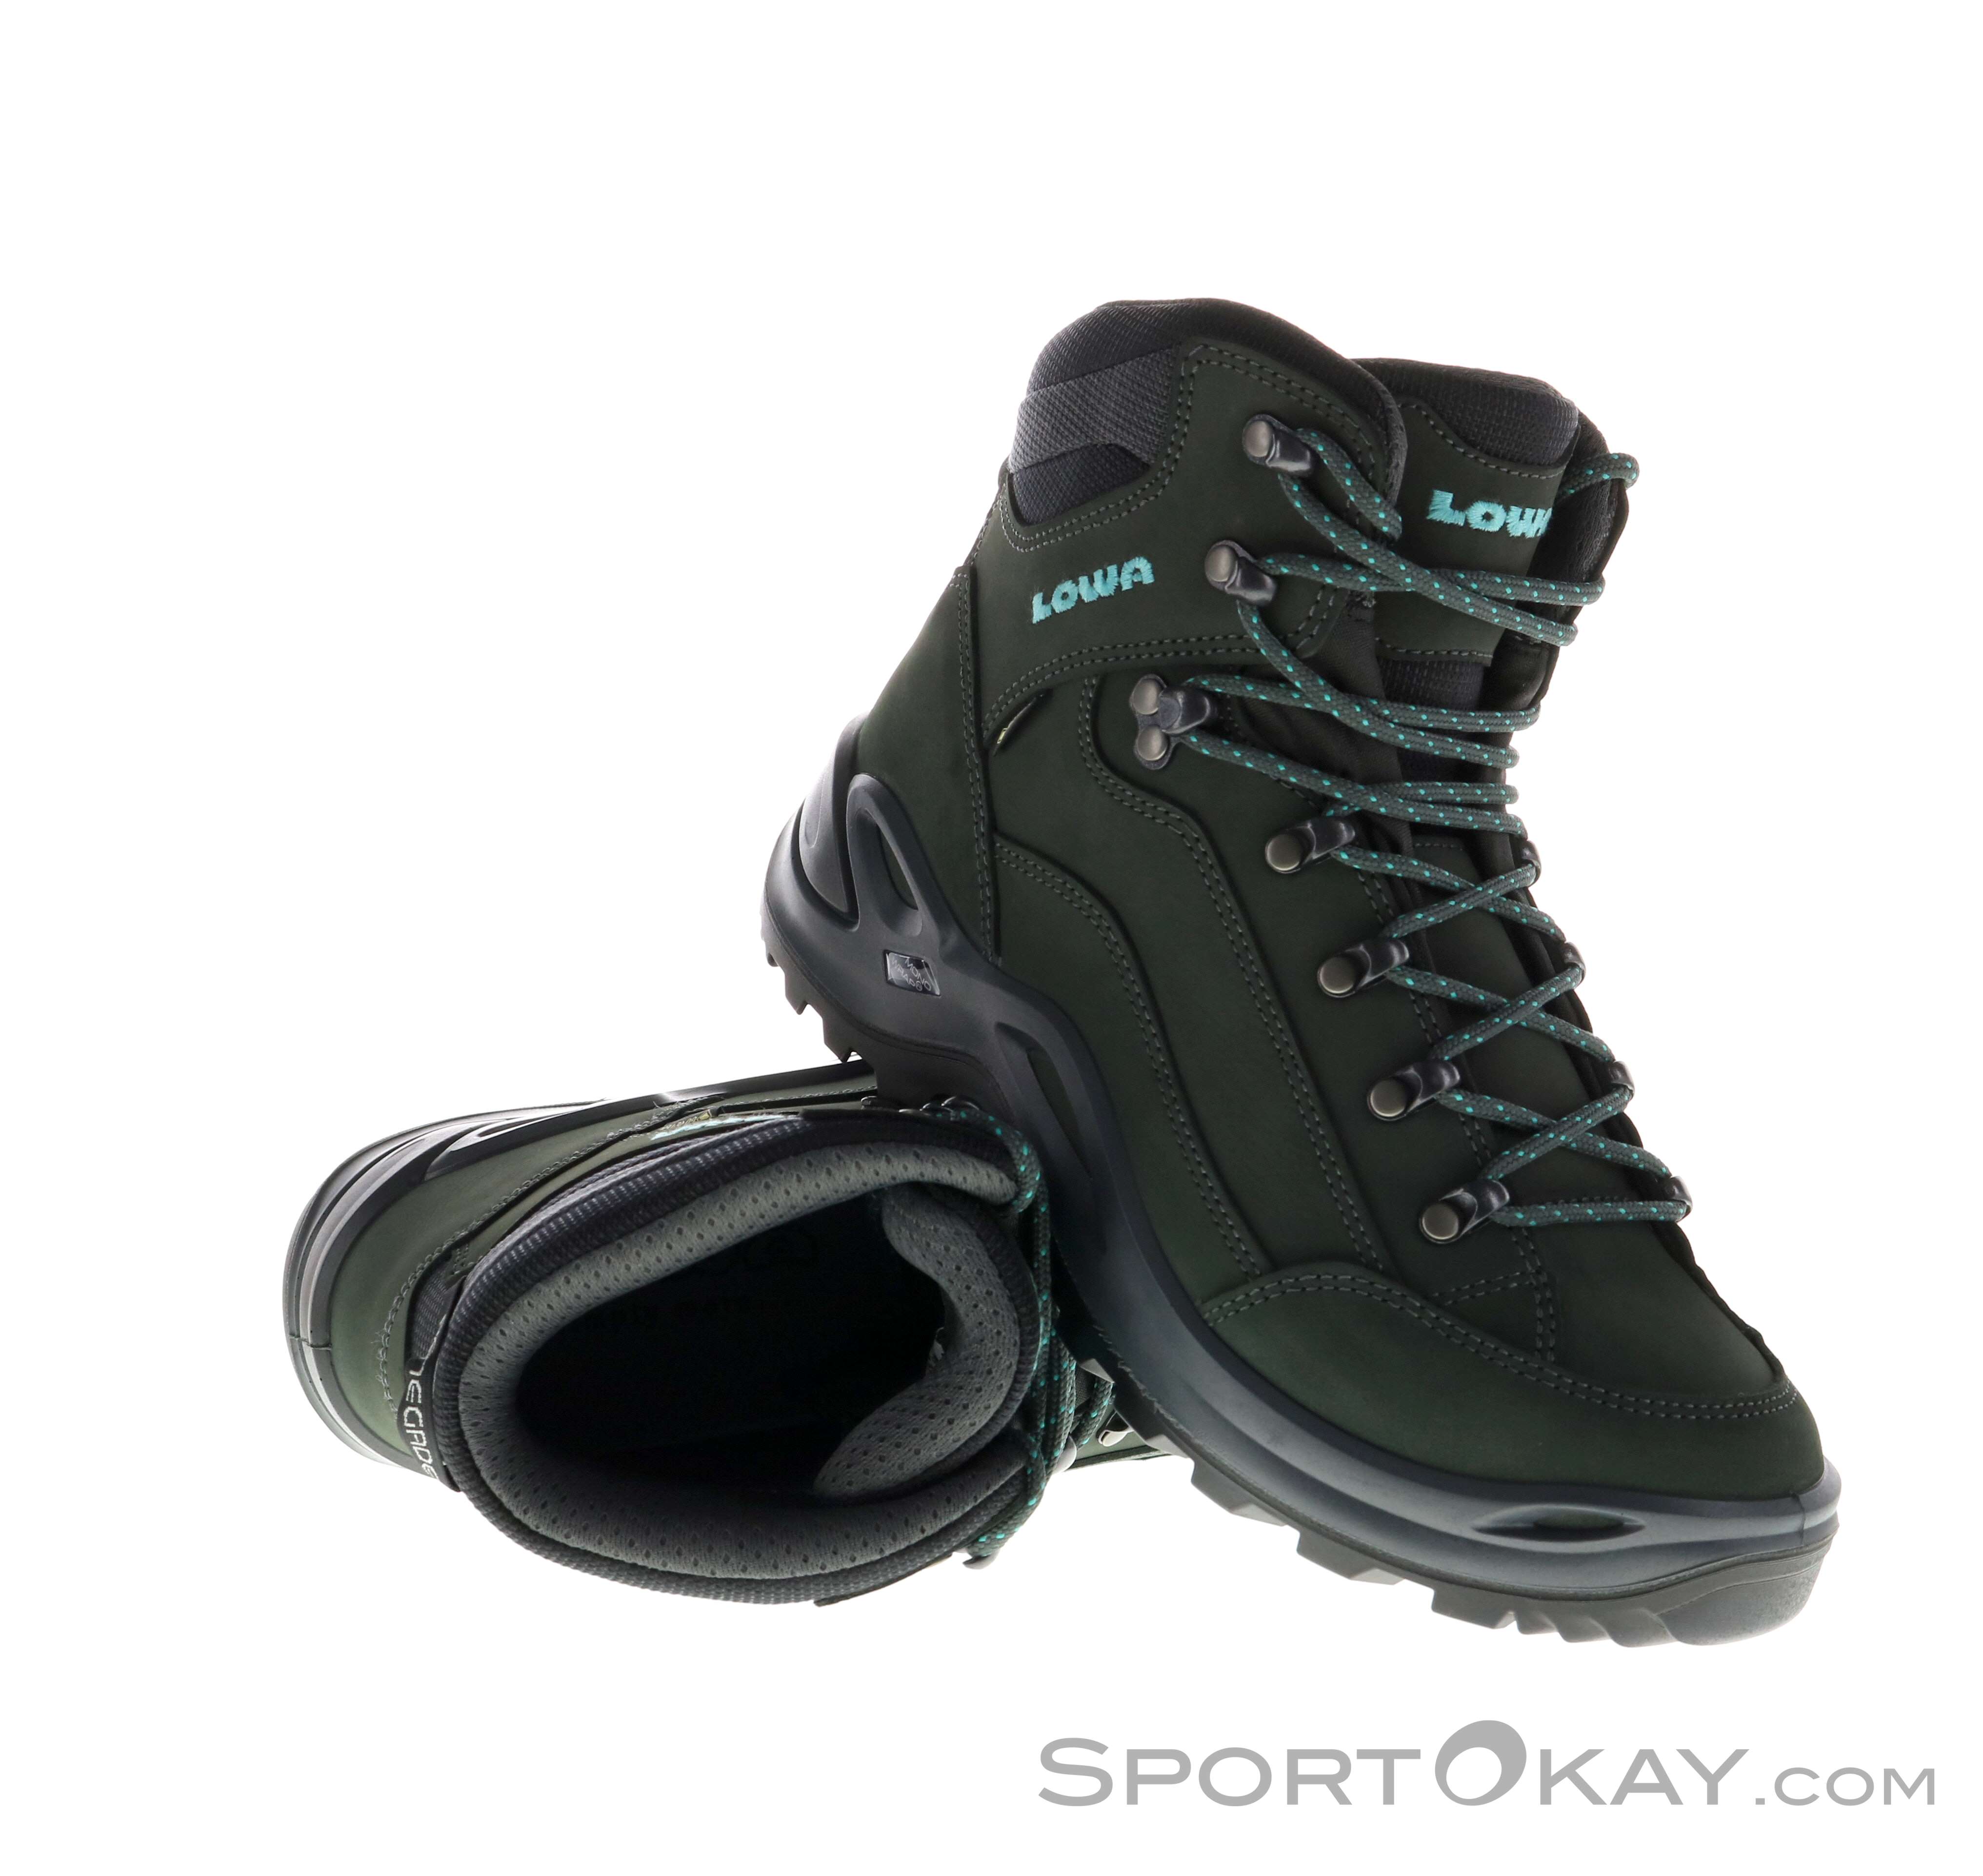 Lowa Renegade Mid GTX Women Hiking Boots Gore-Tex - Hiking - Shoes & Poles - Outdoor - All